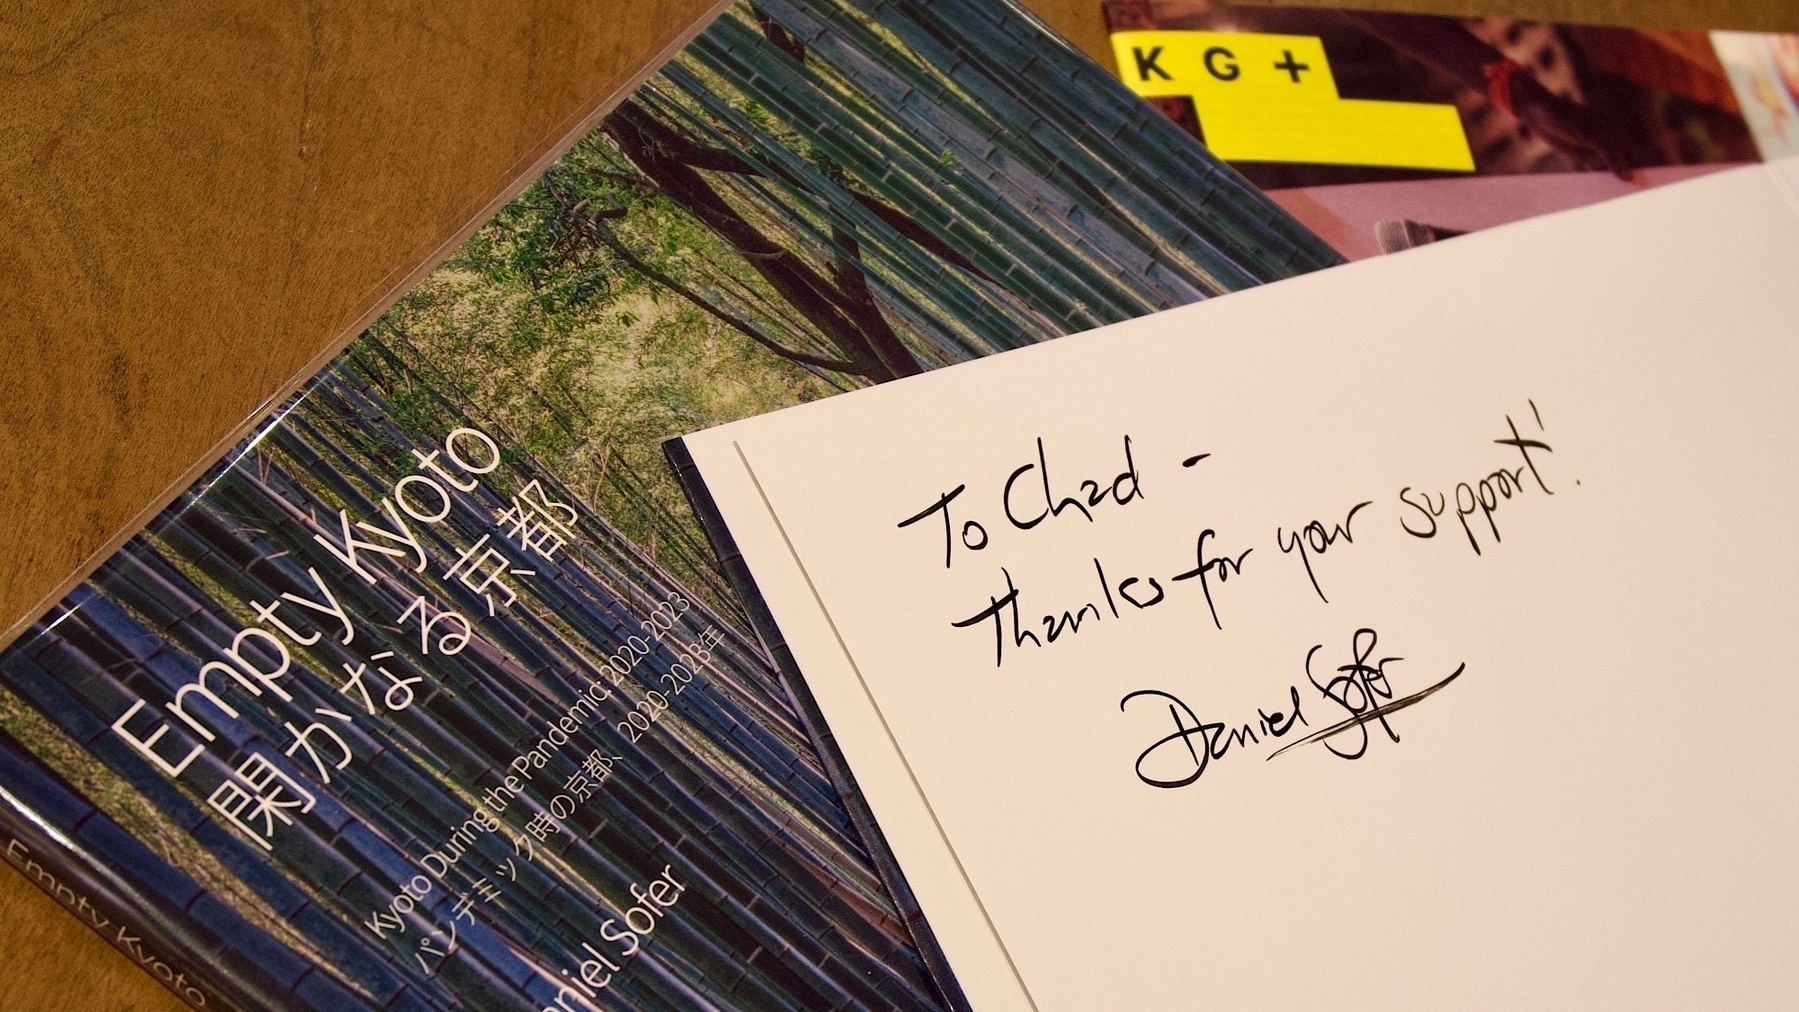 Daniel signed the inside cover of Chad’s book: “To Chad - Thanks for your support”. In the background is a pamphlet for Kyotographie